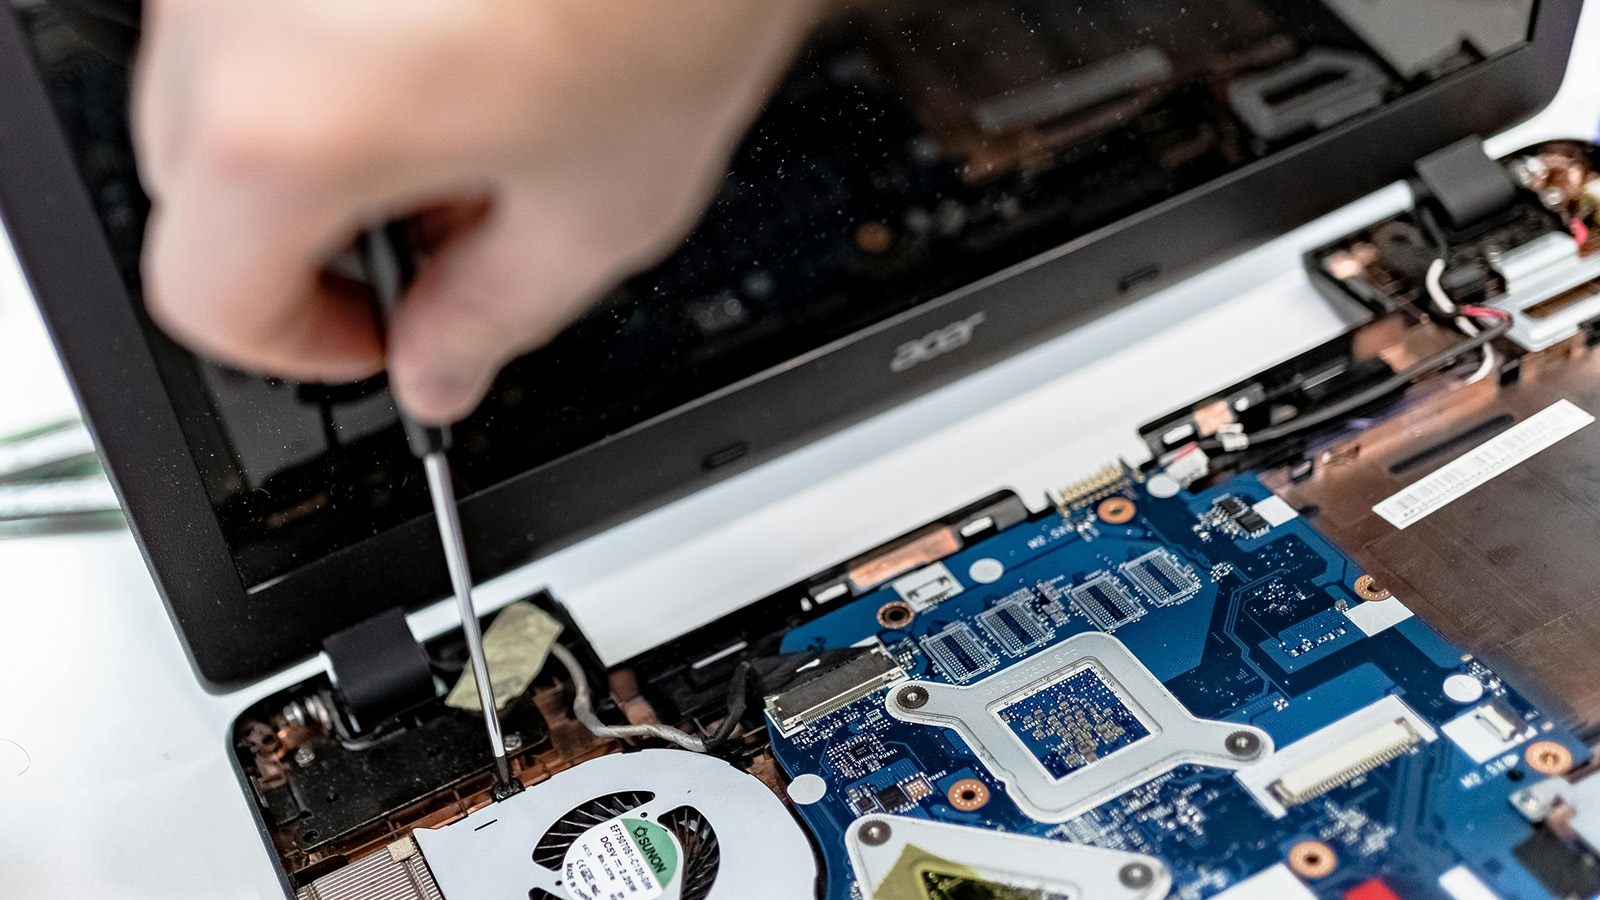 <h4>Right To Repair</h4><p>Tech and other companies too often make things hard to repair. We're backing Right To Repair laws, so you don’t have to throw away so much old stuff and buy so much new stuff.</p><em>Pixabay.com</em>